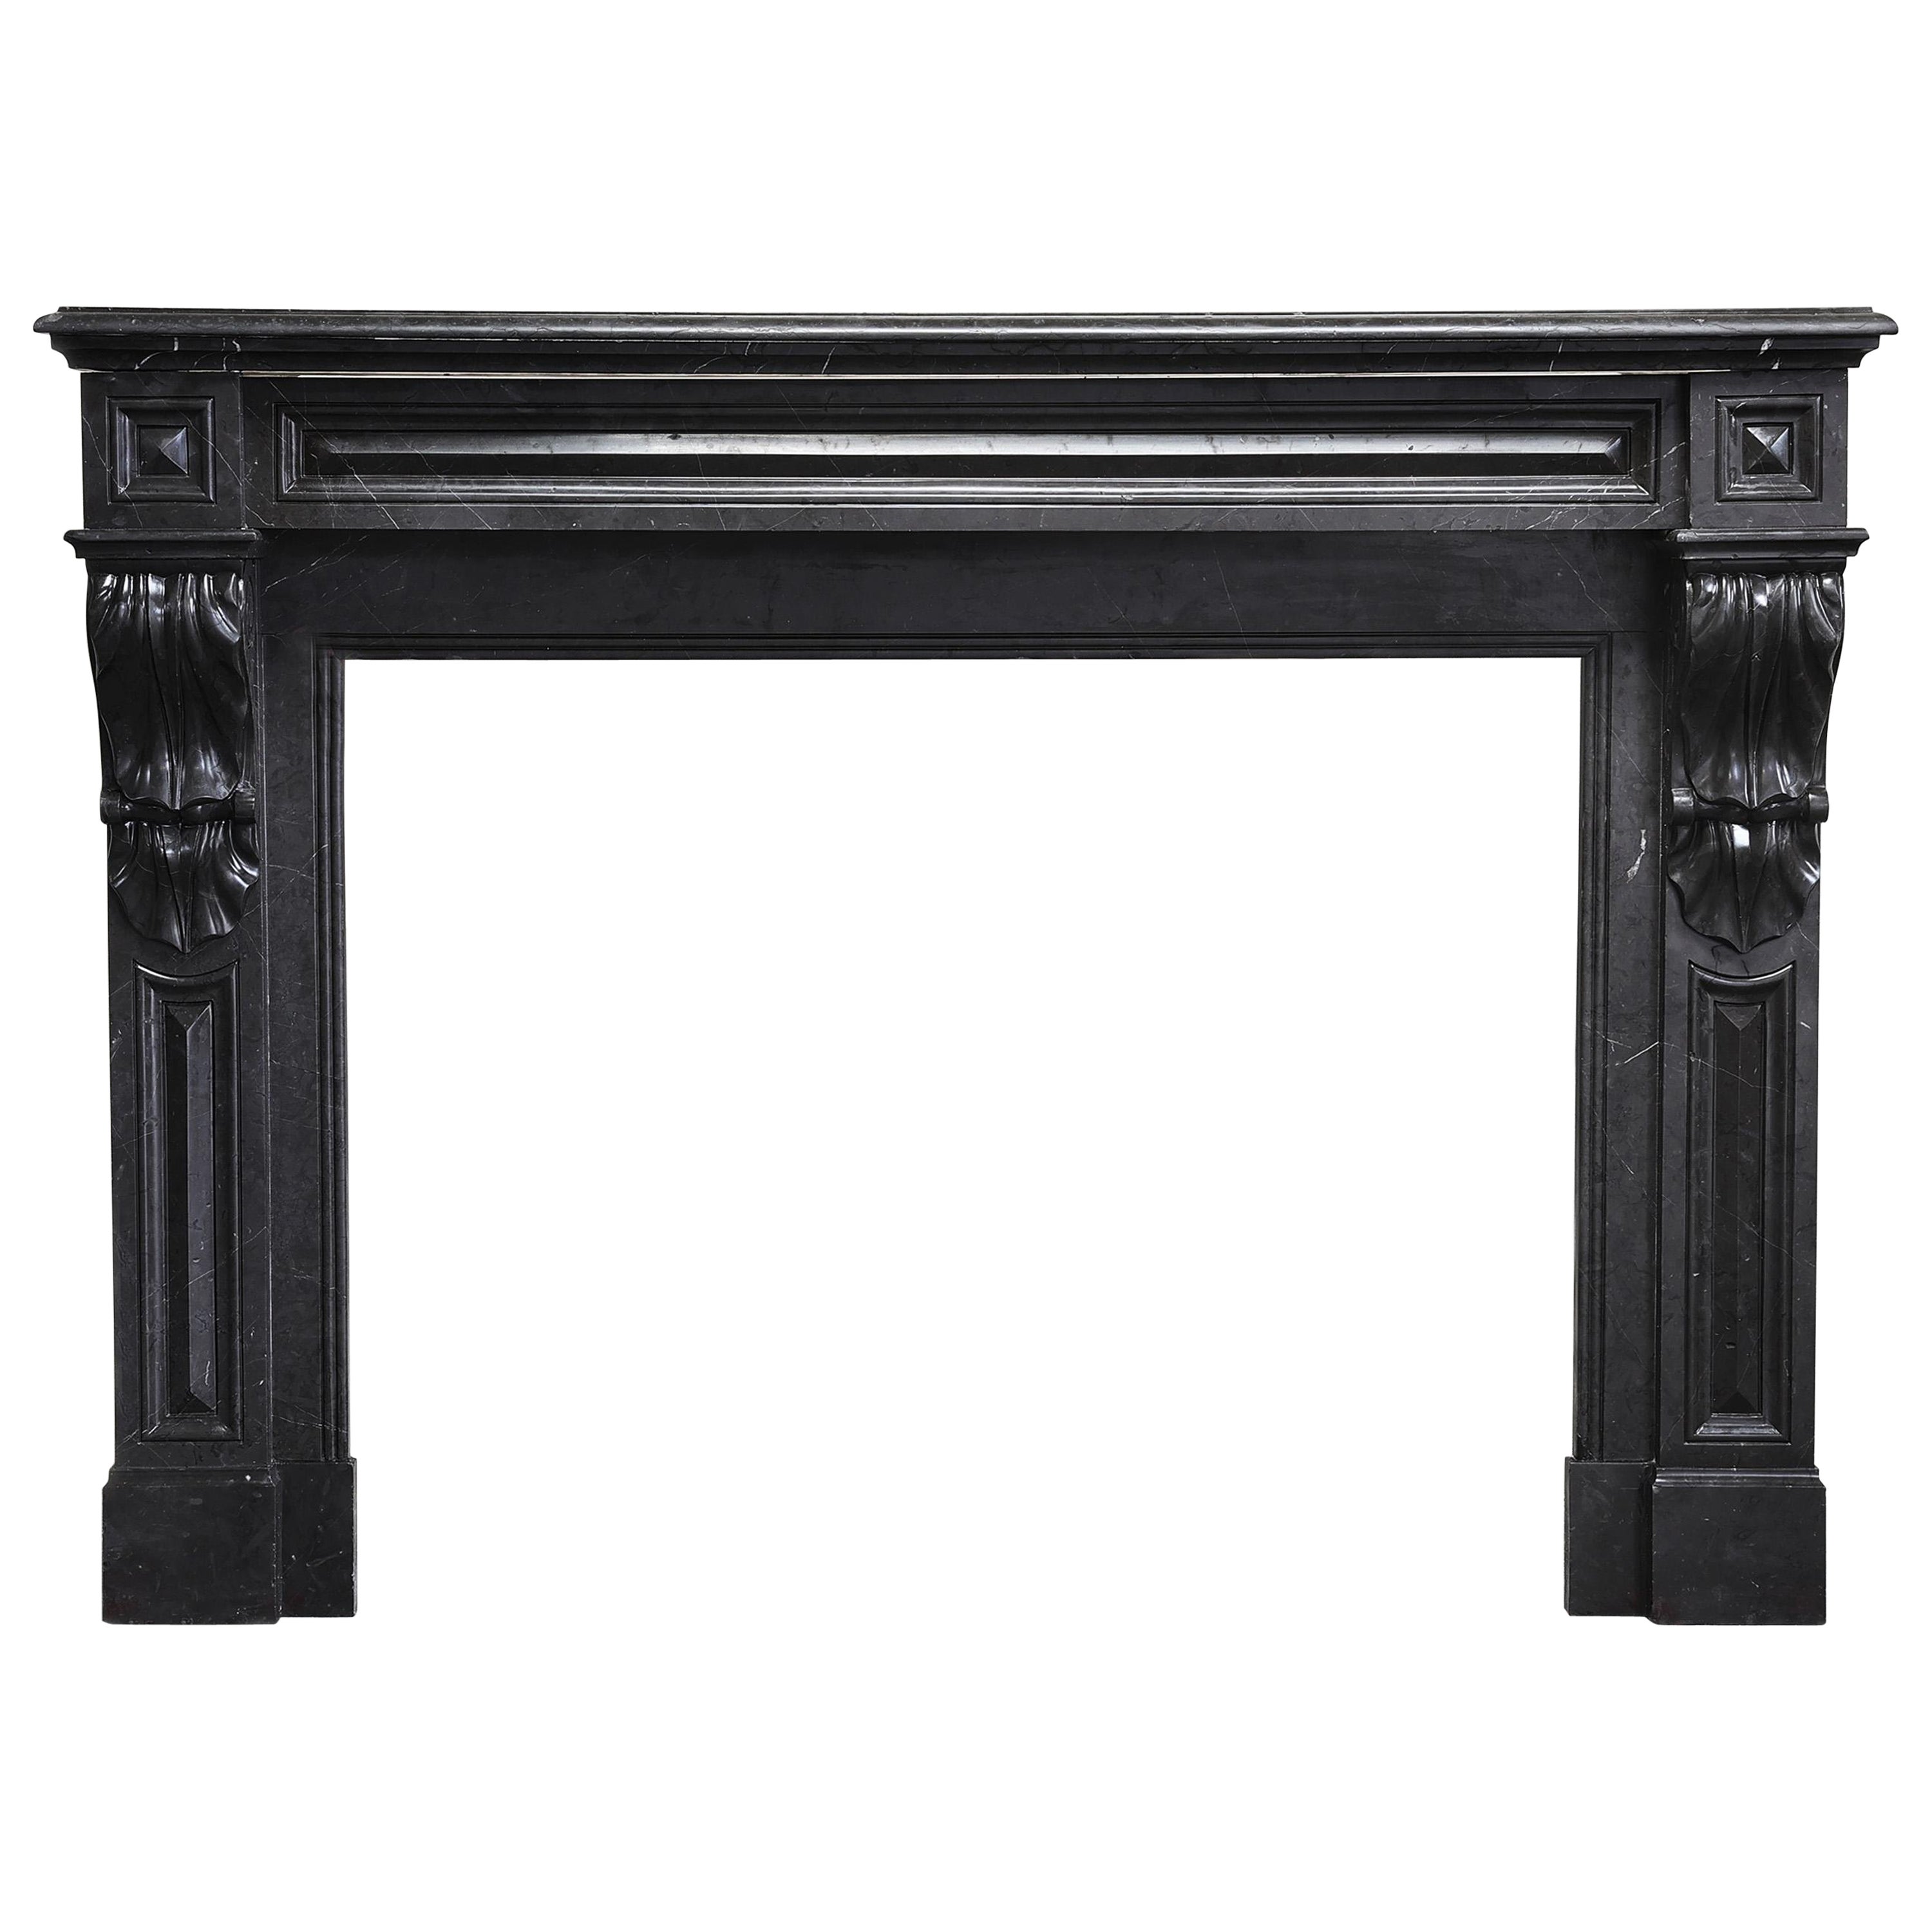 antique fireplace of Nero Marquina marble in style of Louis XVI For Sale